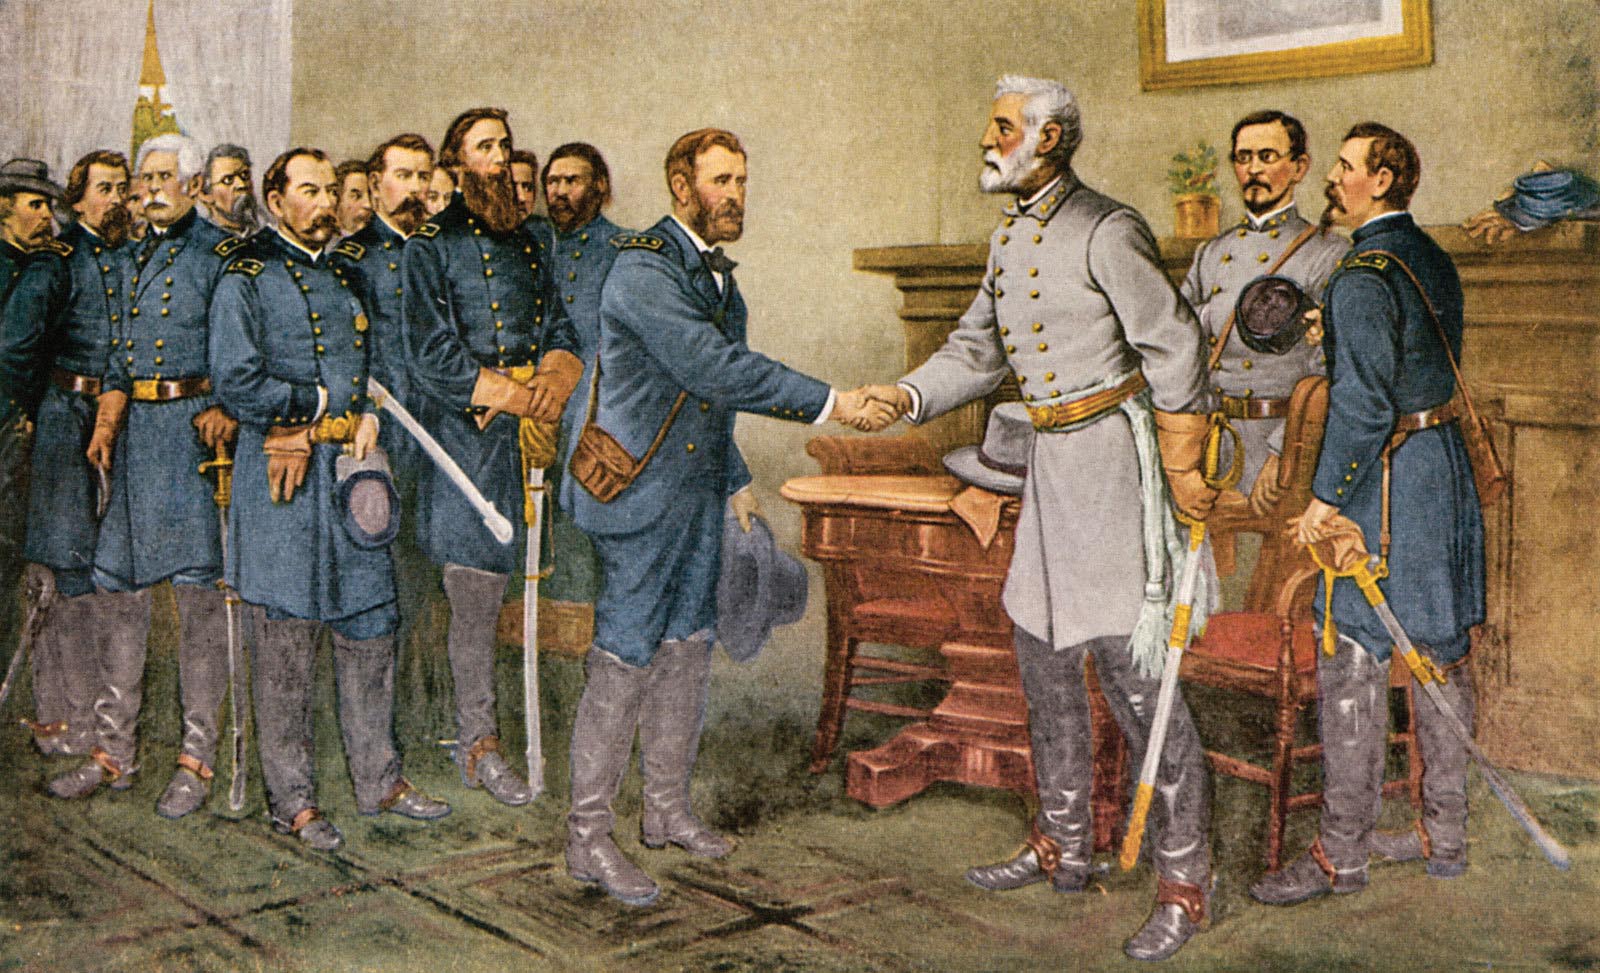 Oil painting depicts the surrender of Confederate Army General Robert E Lee to Union Lt. General Ulysses S. Grant in Northern Virginia.